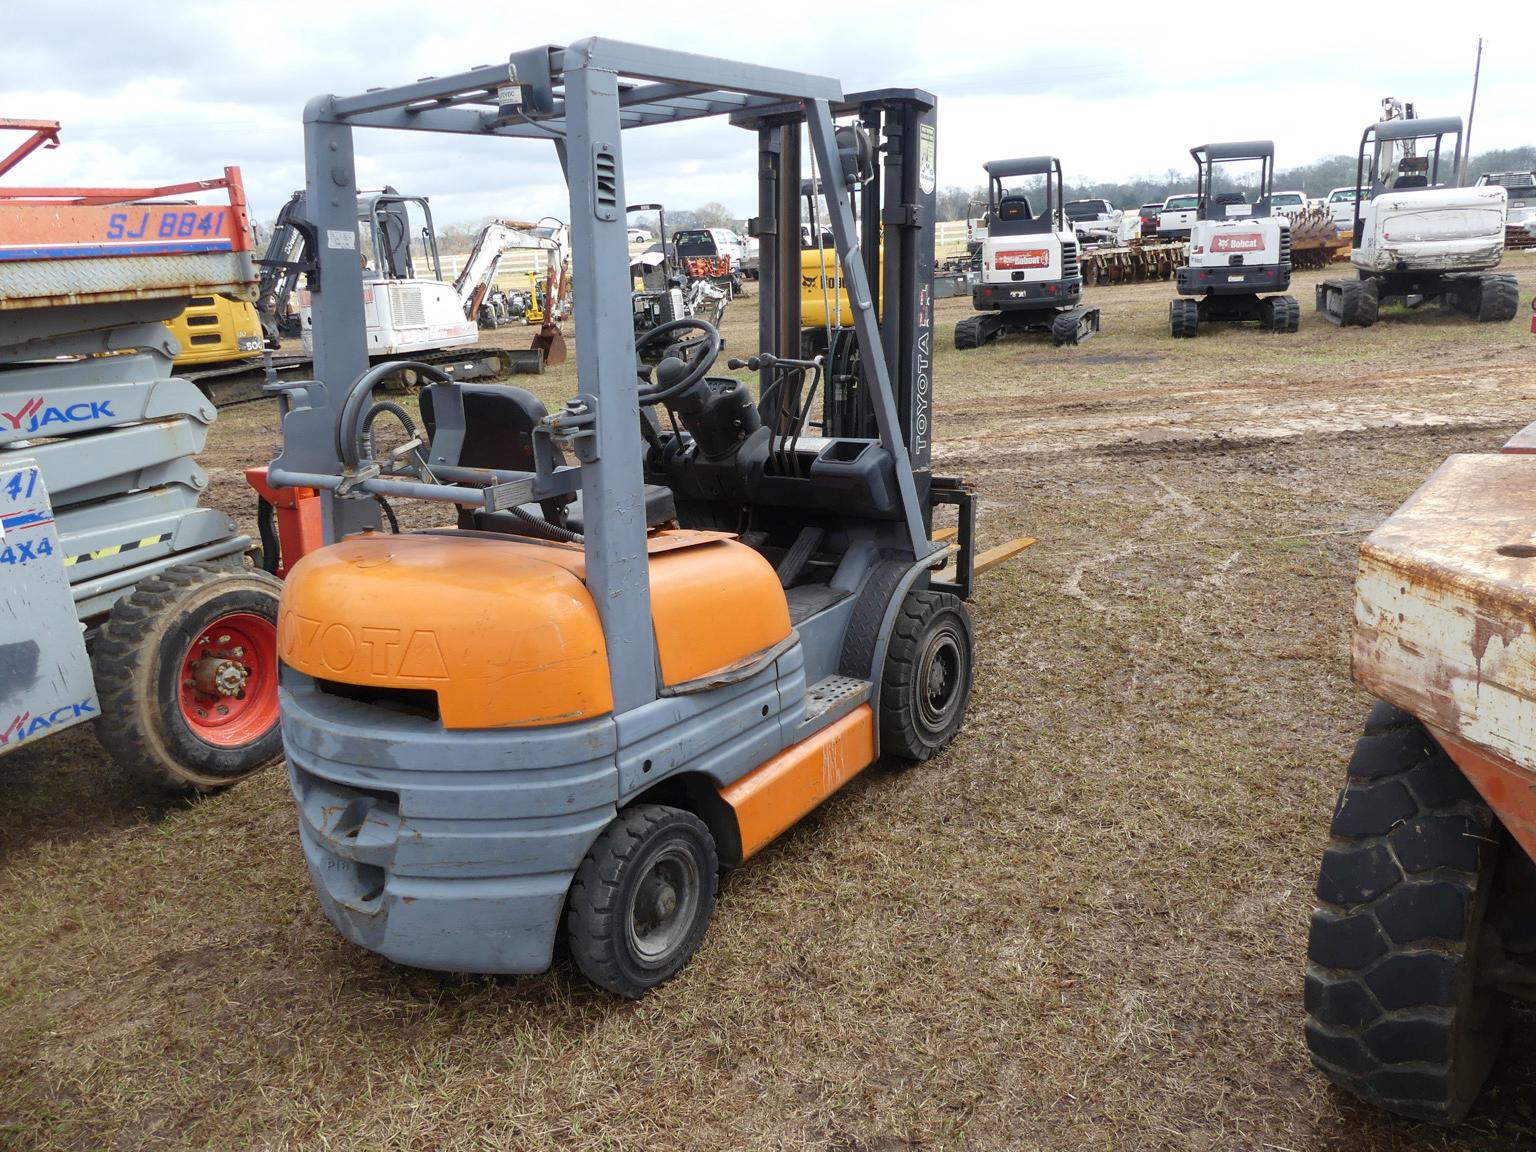 Toyota Forklift, s/n D702743 (Salvage): Electrical Issue